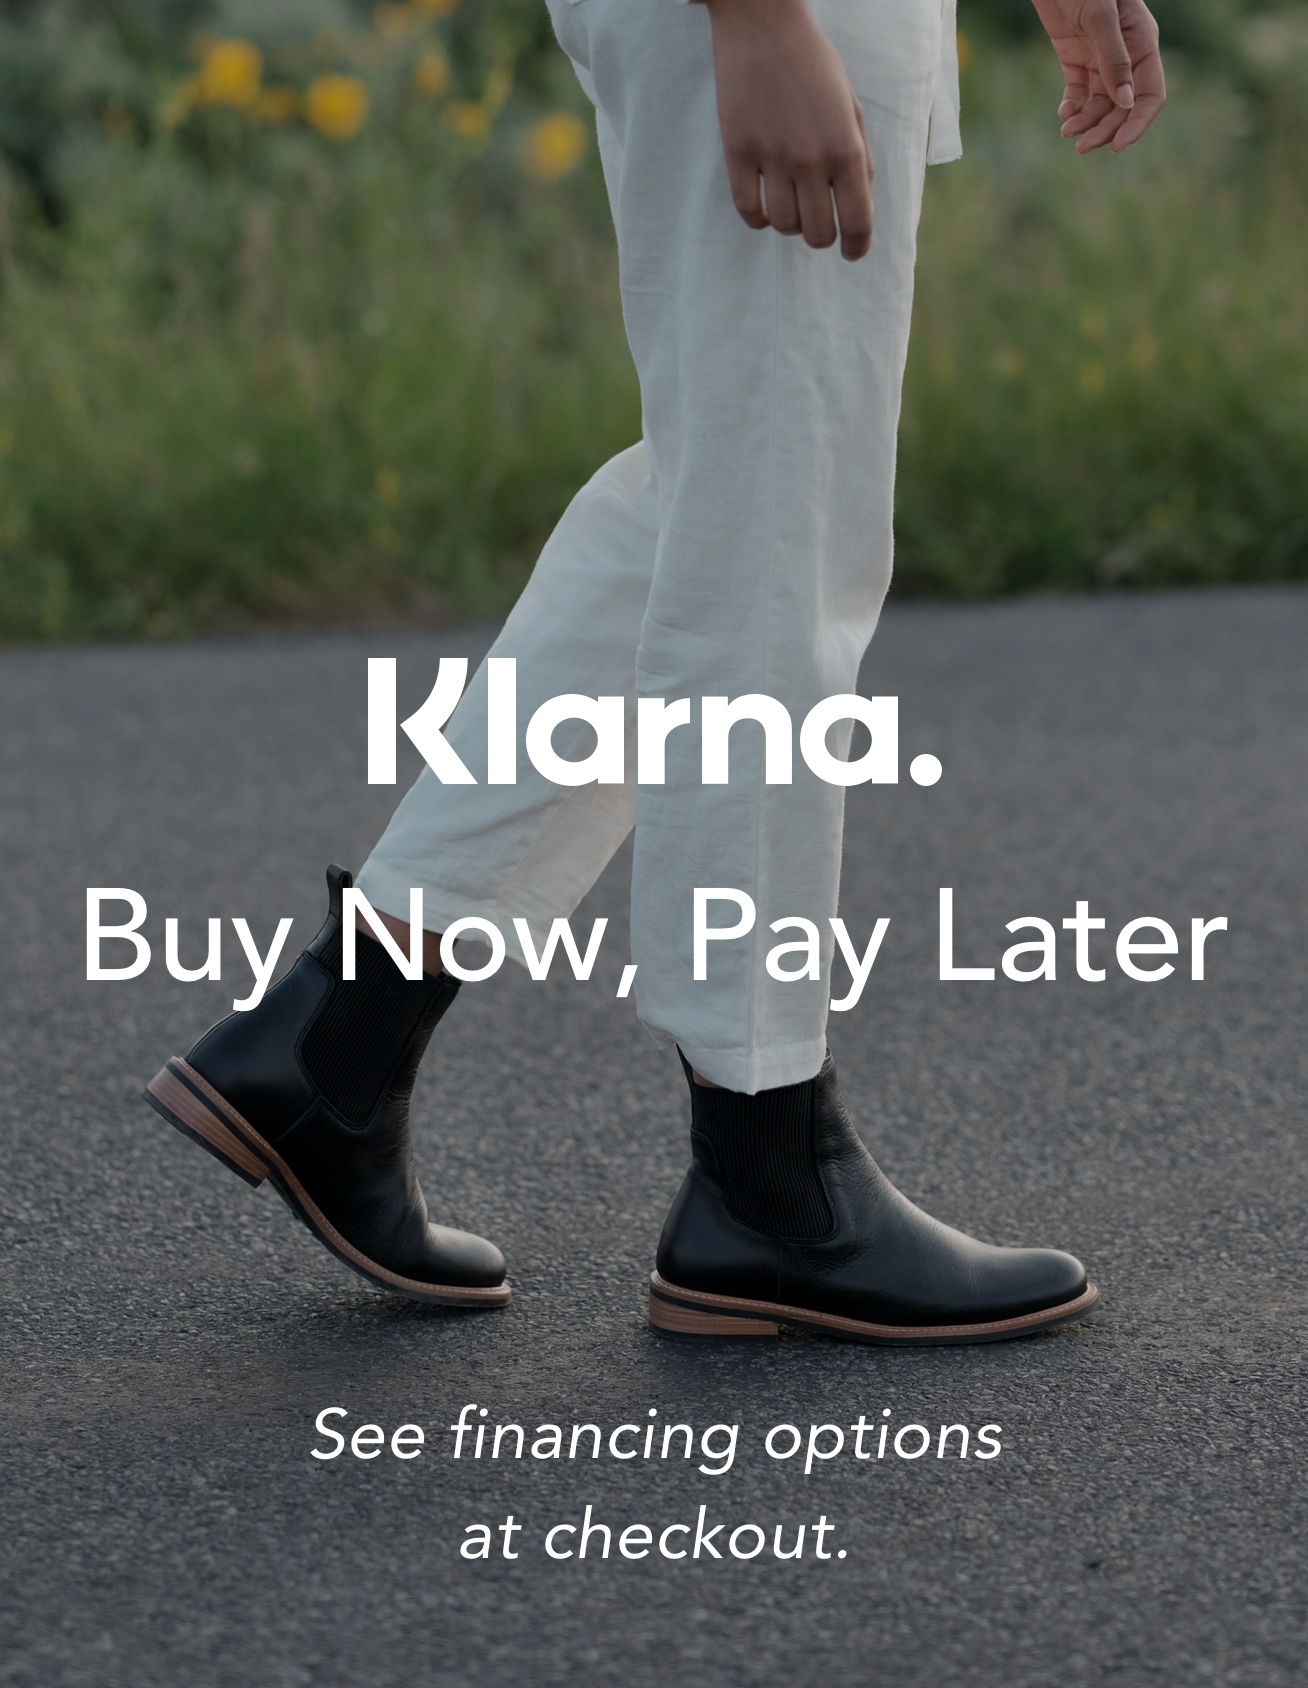 We partner with Klarna for a buy now, pay later financing option. Learn more at checkout.